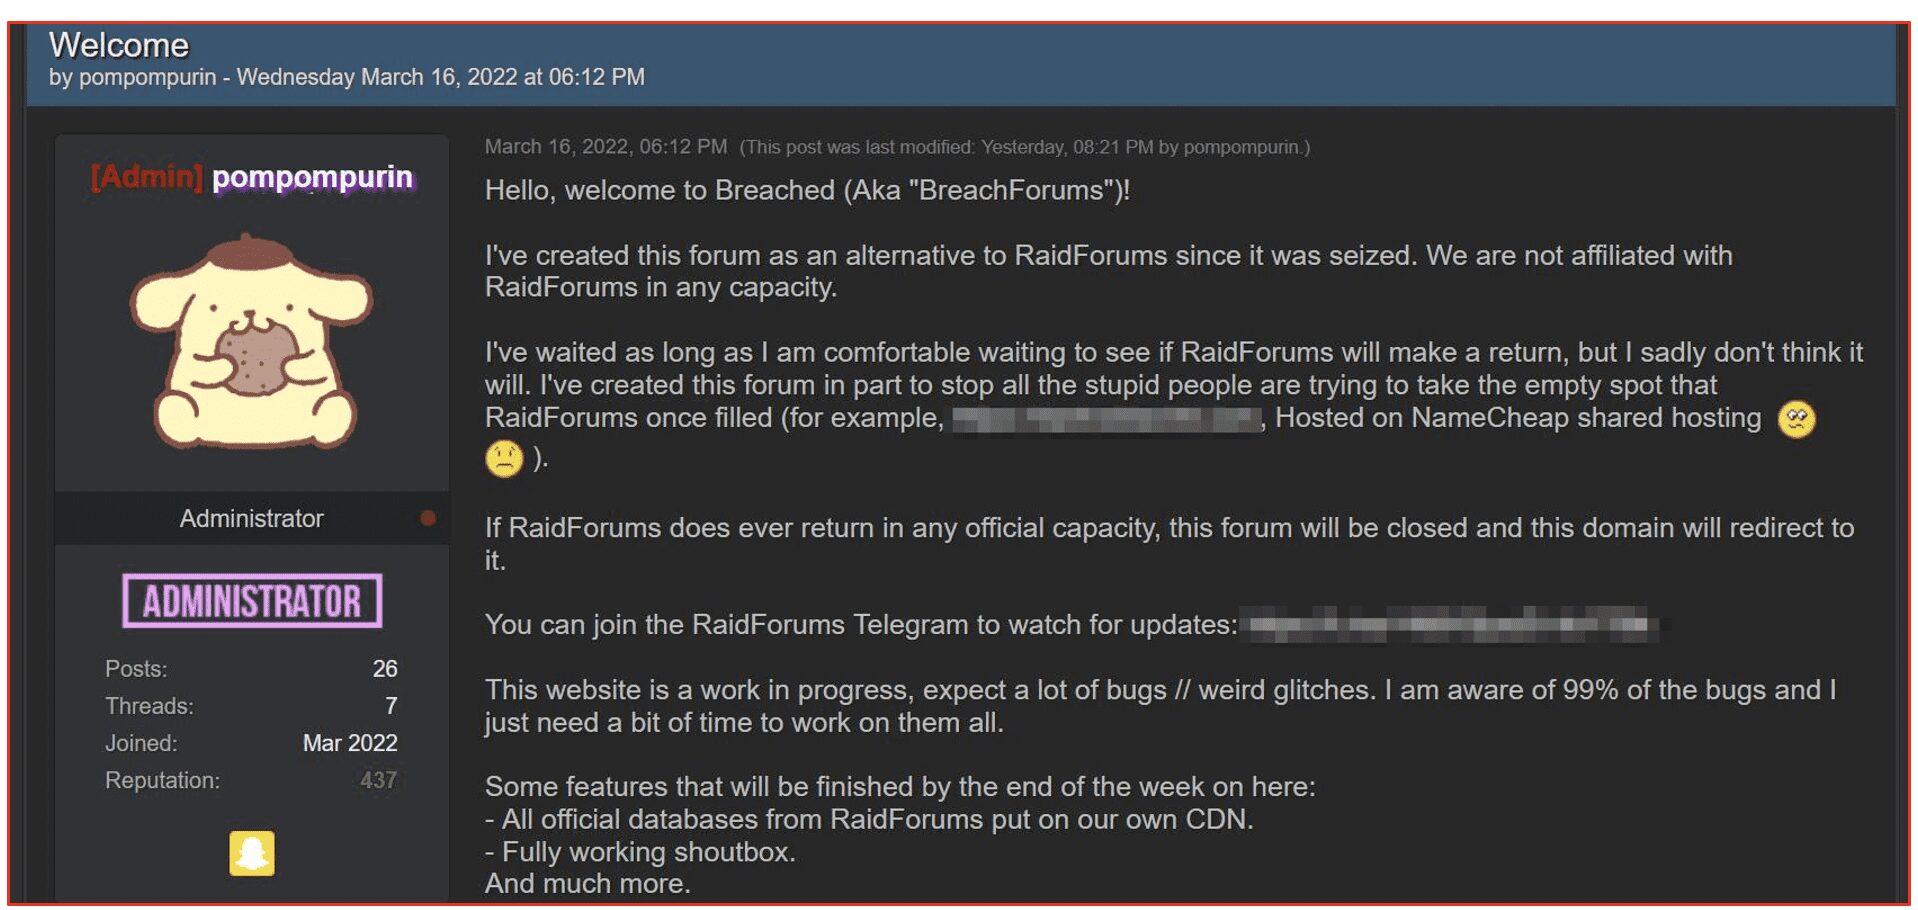 Post by pompomurin claiming no direct affiliation with RaidForums and if RaidForums ever returned in an official capacity, then he would shut down BF and redirect the domain to the main RaidForums site.